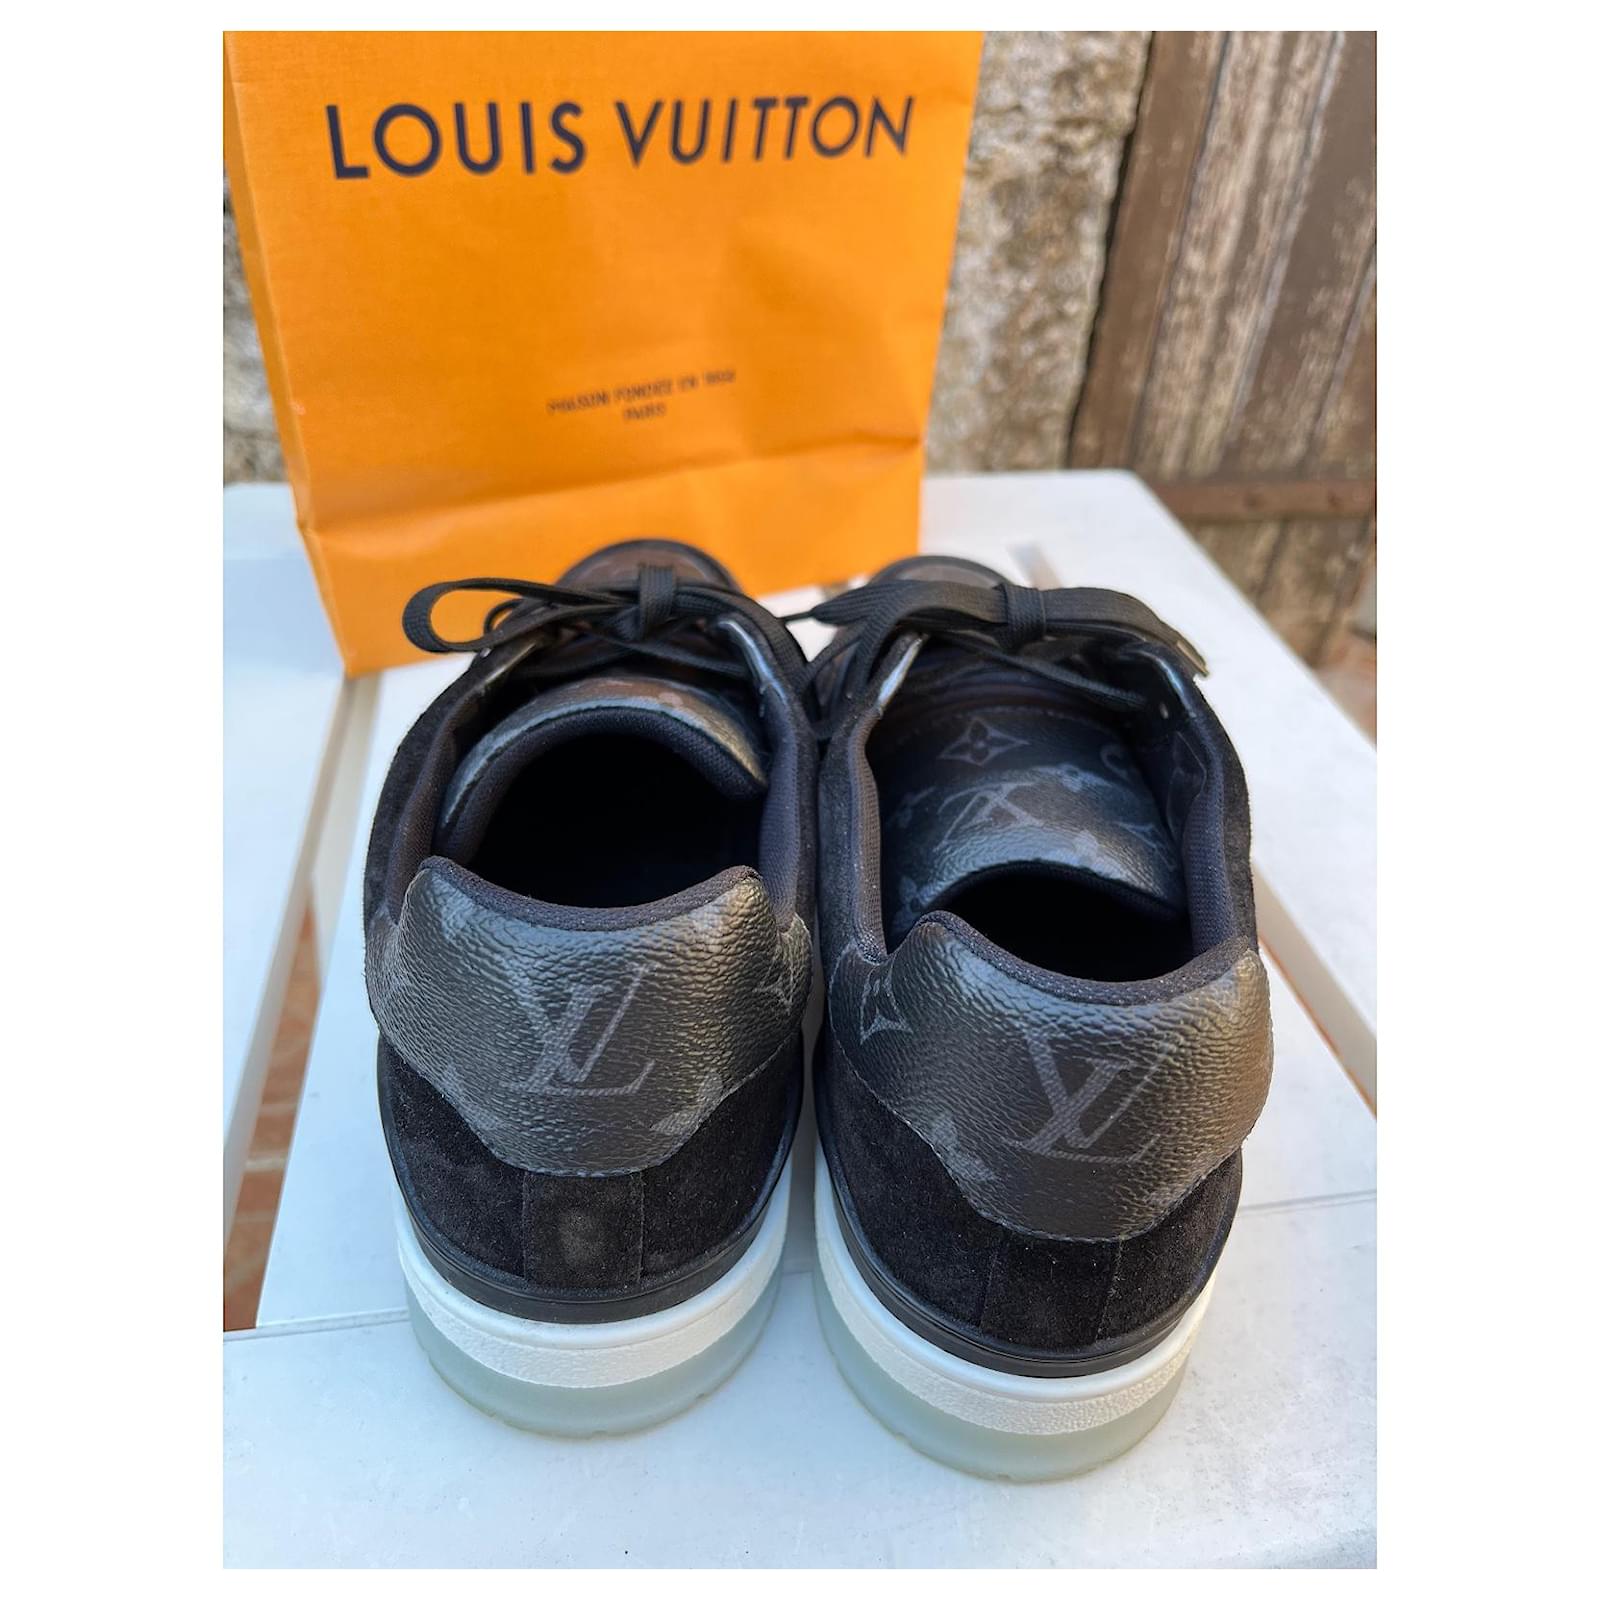 Sneakers Louis Vuitton LV Trainer Size 9 US